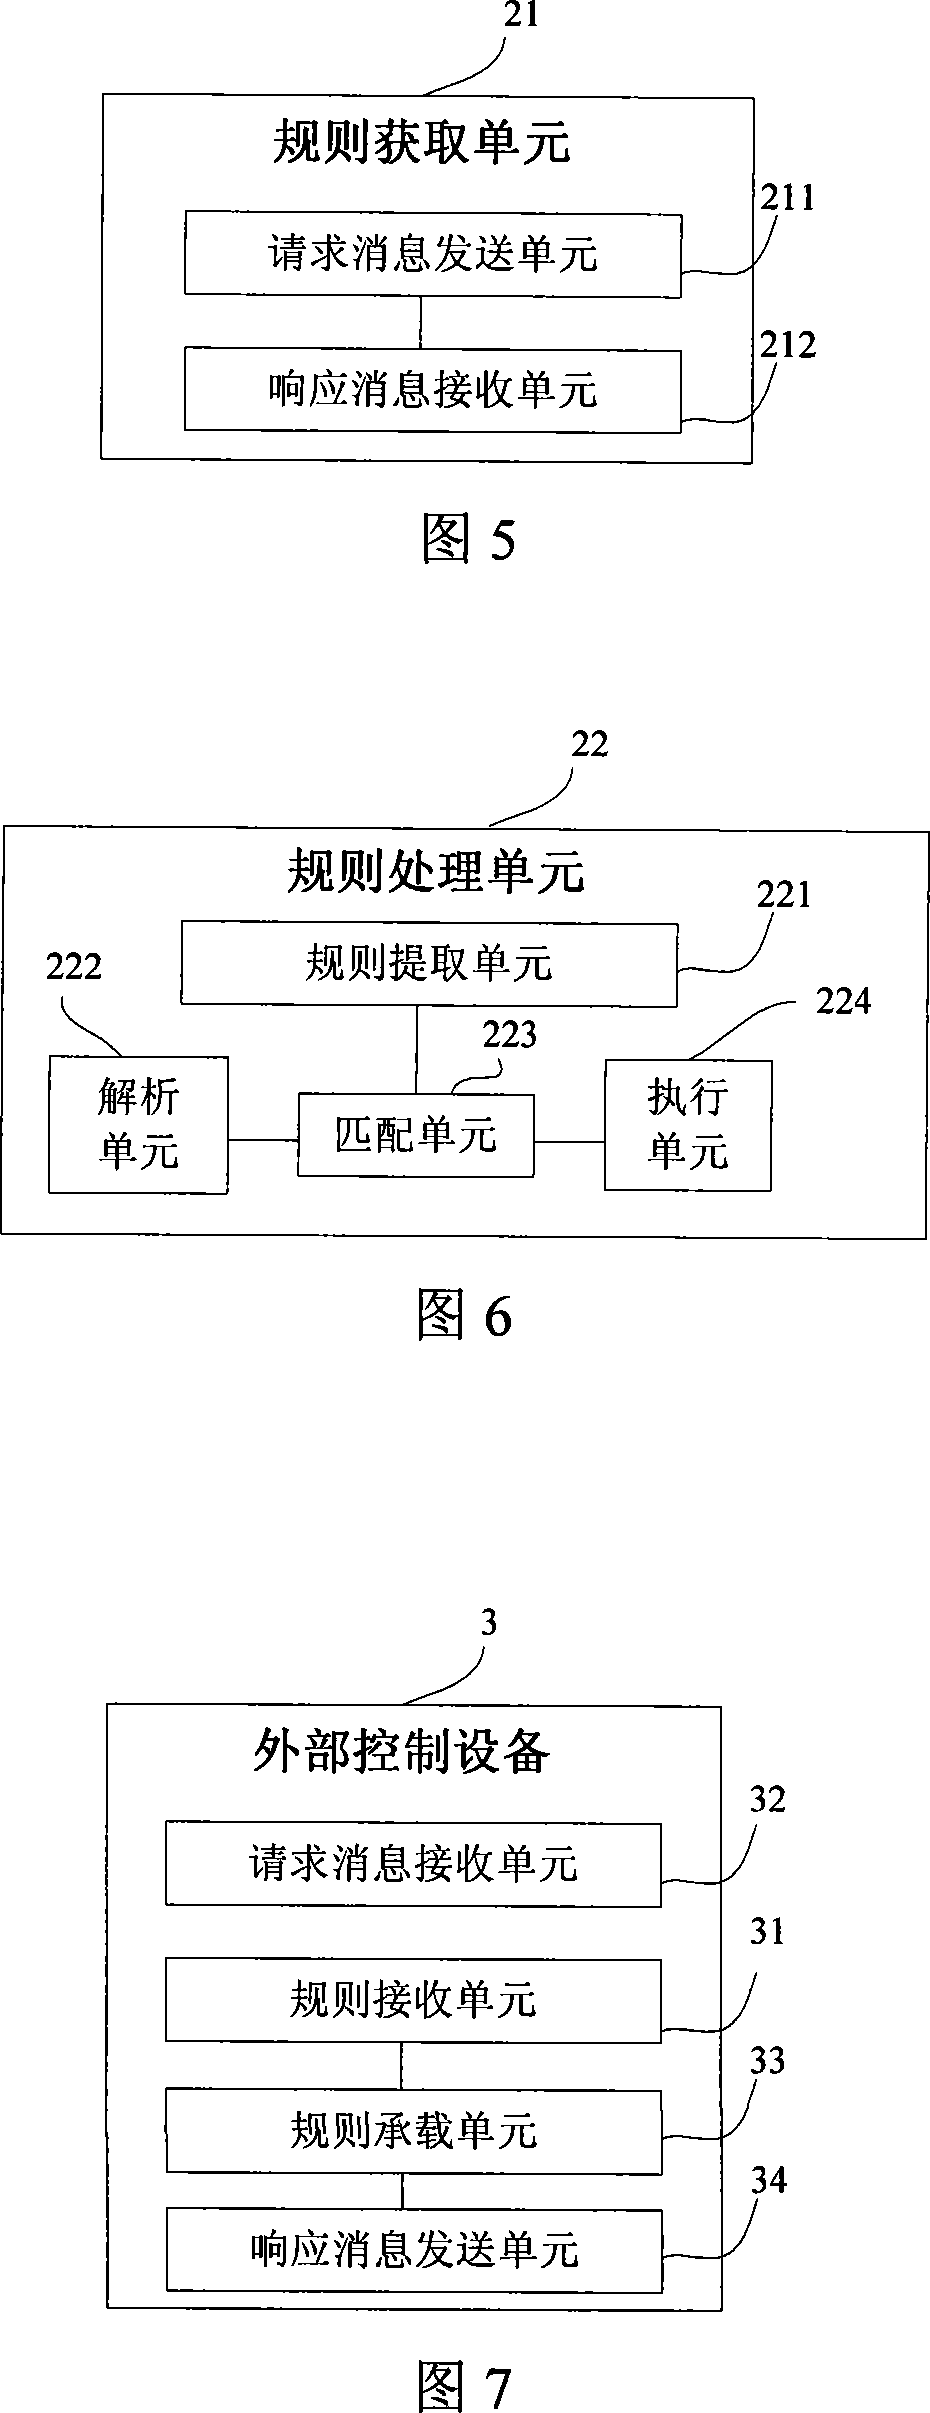 Method and system for implementing customizable business control